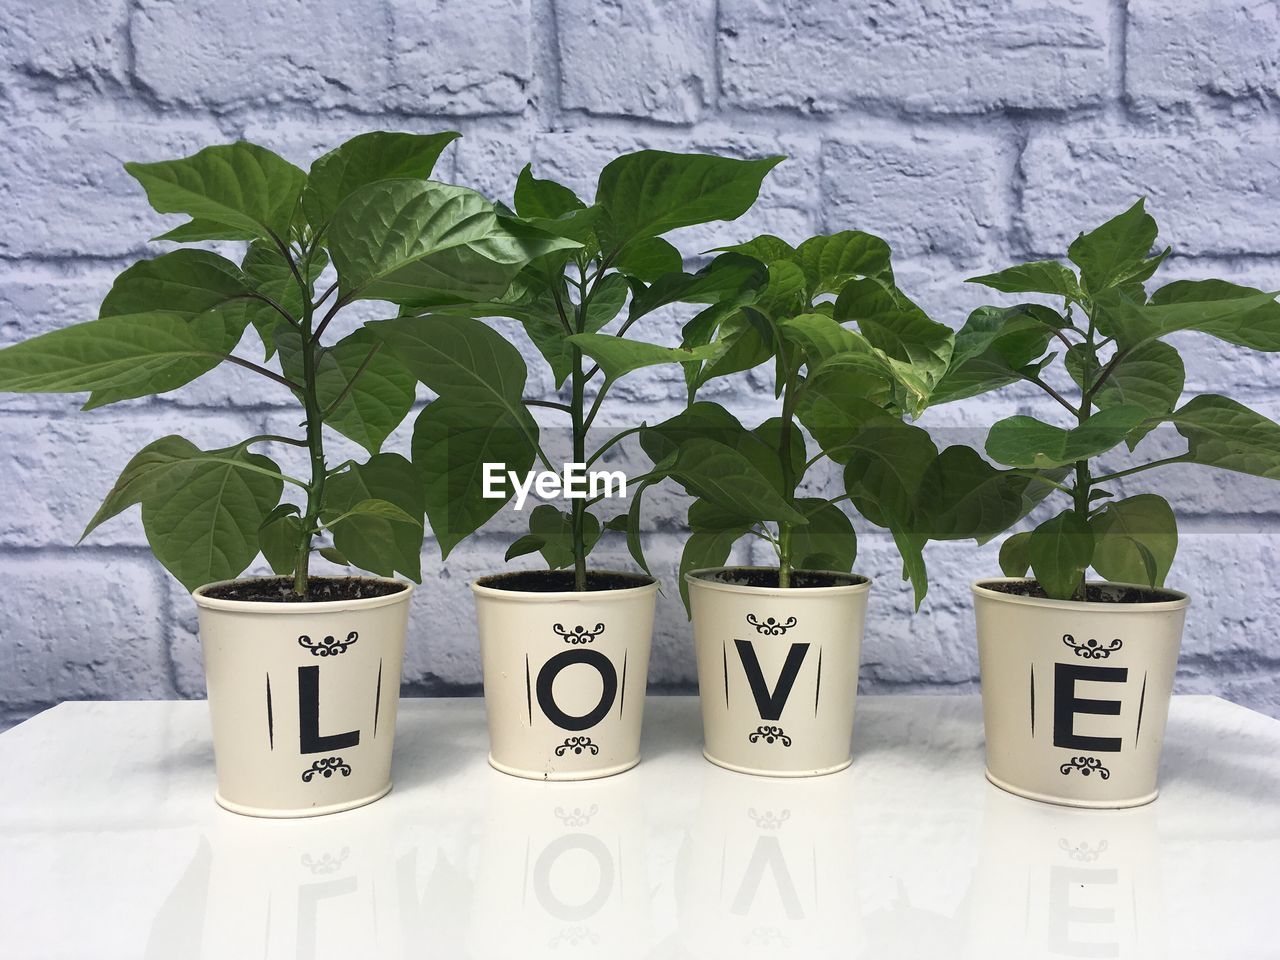 CLOSE-UP OF POTTED PLANT WITH TEXT ON WALL